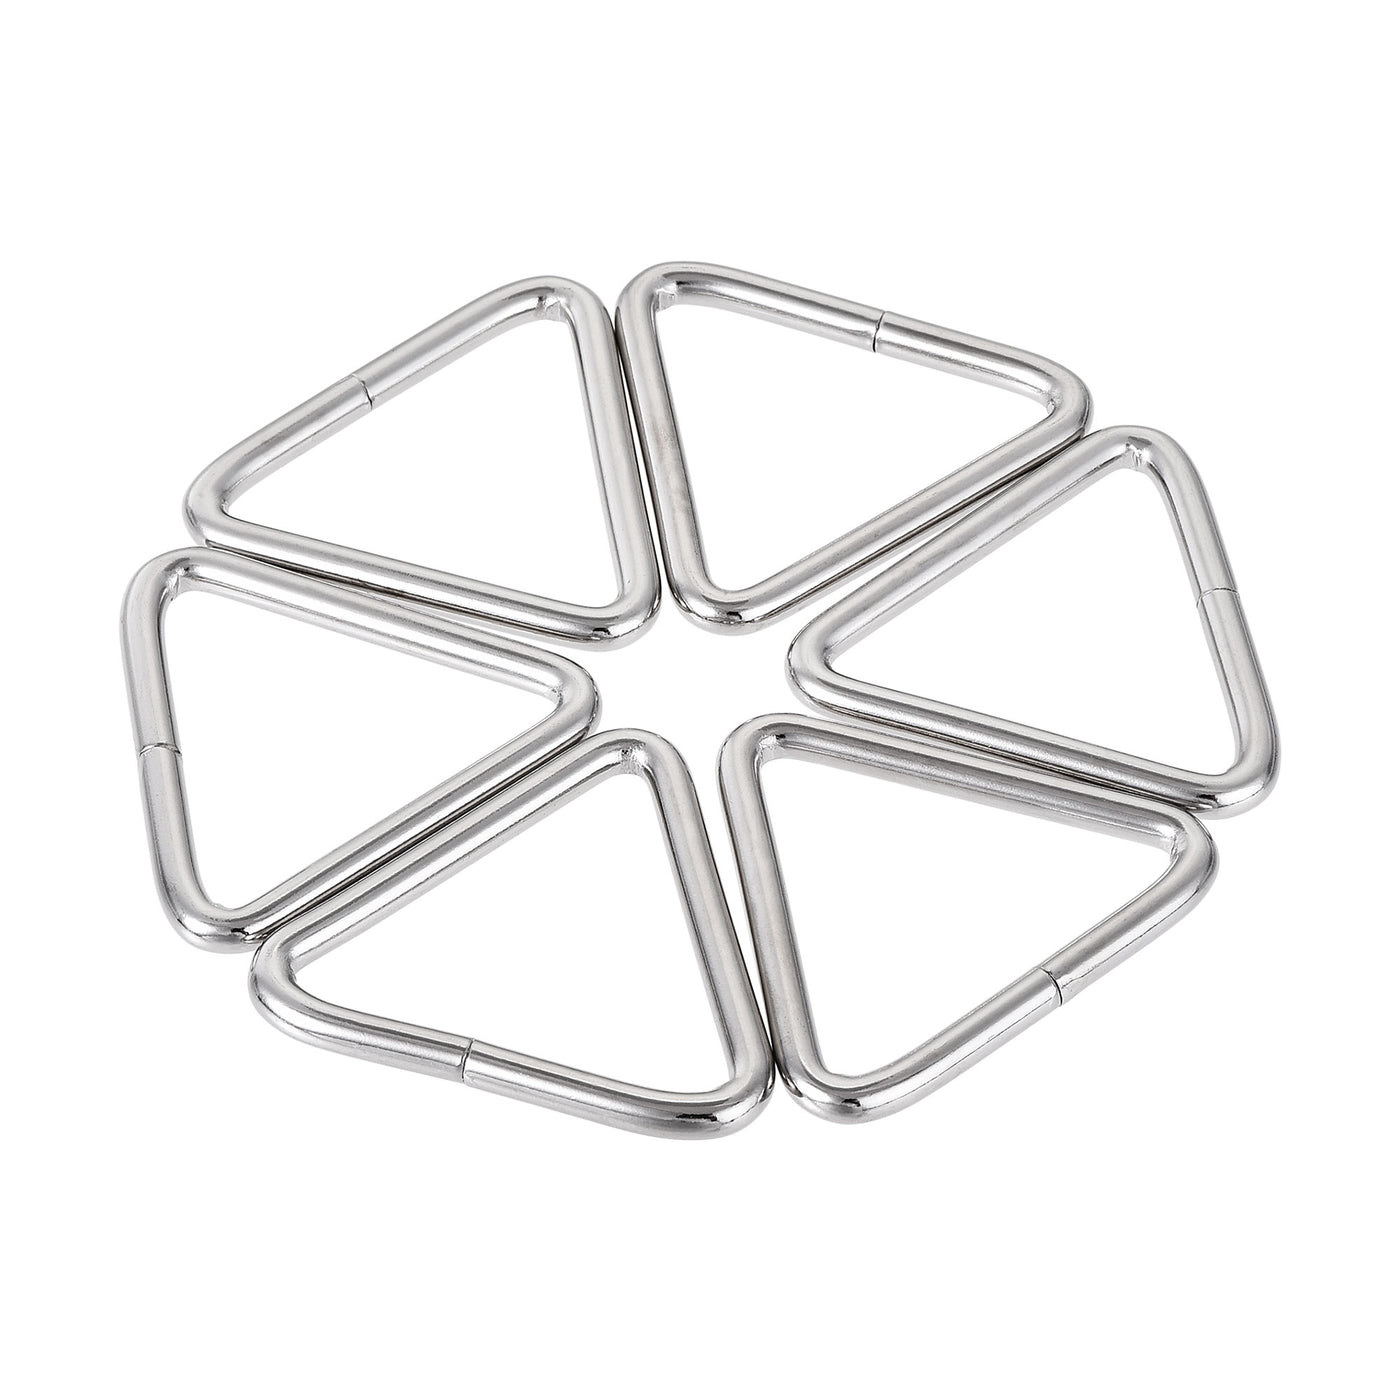 uxcell Uxcell Triangle Ring Buckle, 1.46"(37mm) Inner Width for Hardware Strap Craft DIY 10pcs